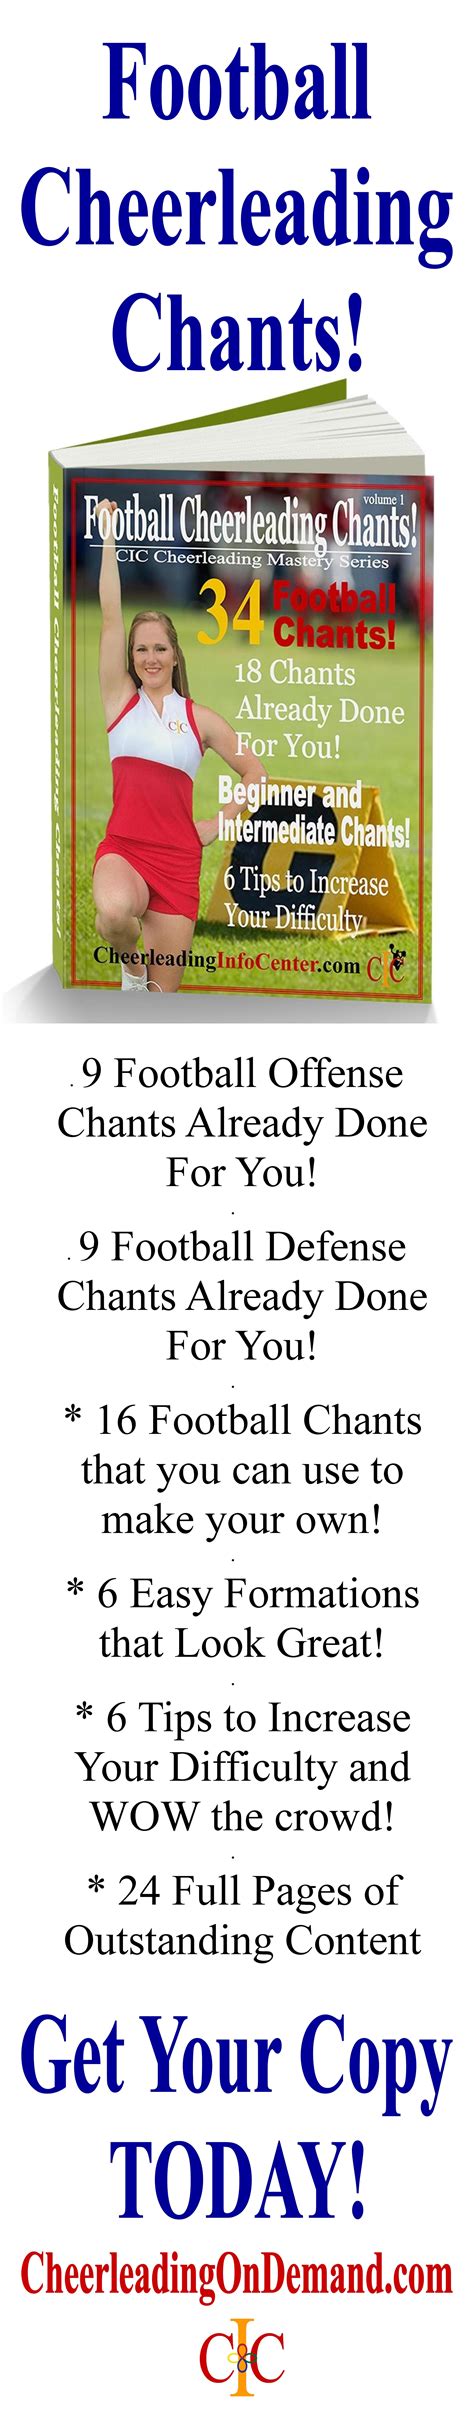 Cheerleading Football Cheers And Chants Fun And Easy To Learn Cheerleading Formations And